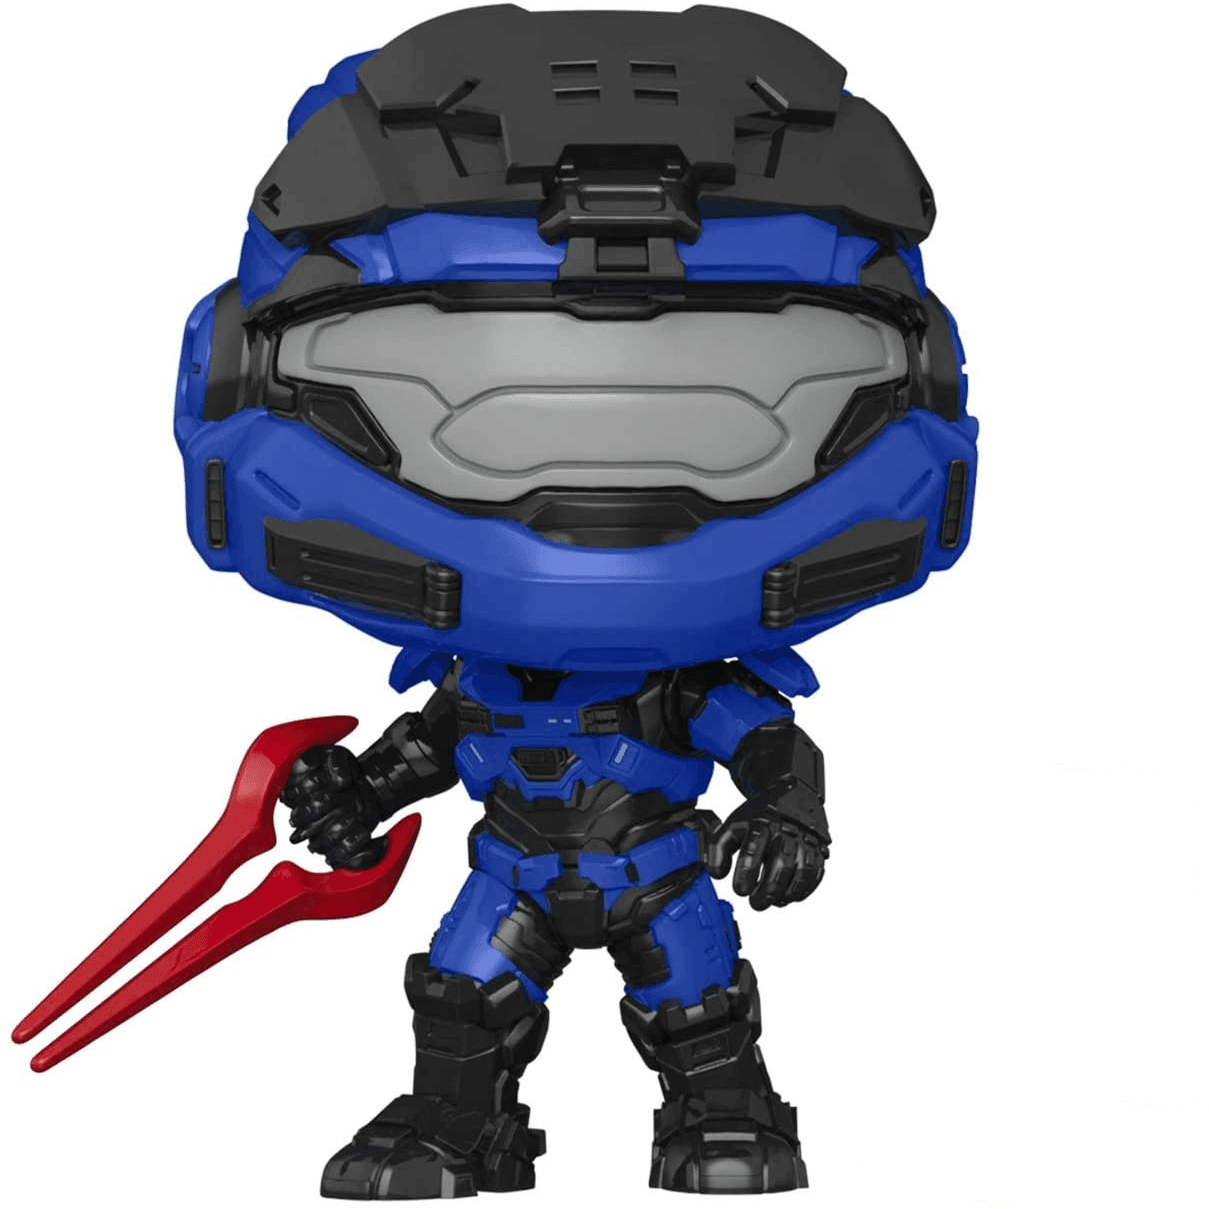 Funko Pop Games Halo Infinite - Mark V [B] with Blue Energy Sword - BumbleToys - 18+, Action Figures, Boys, Funko, Halo, OXE, Pre-Order